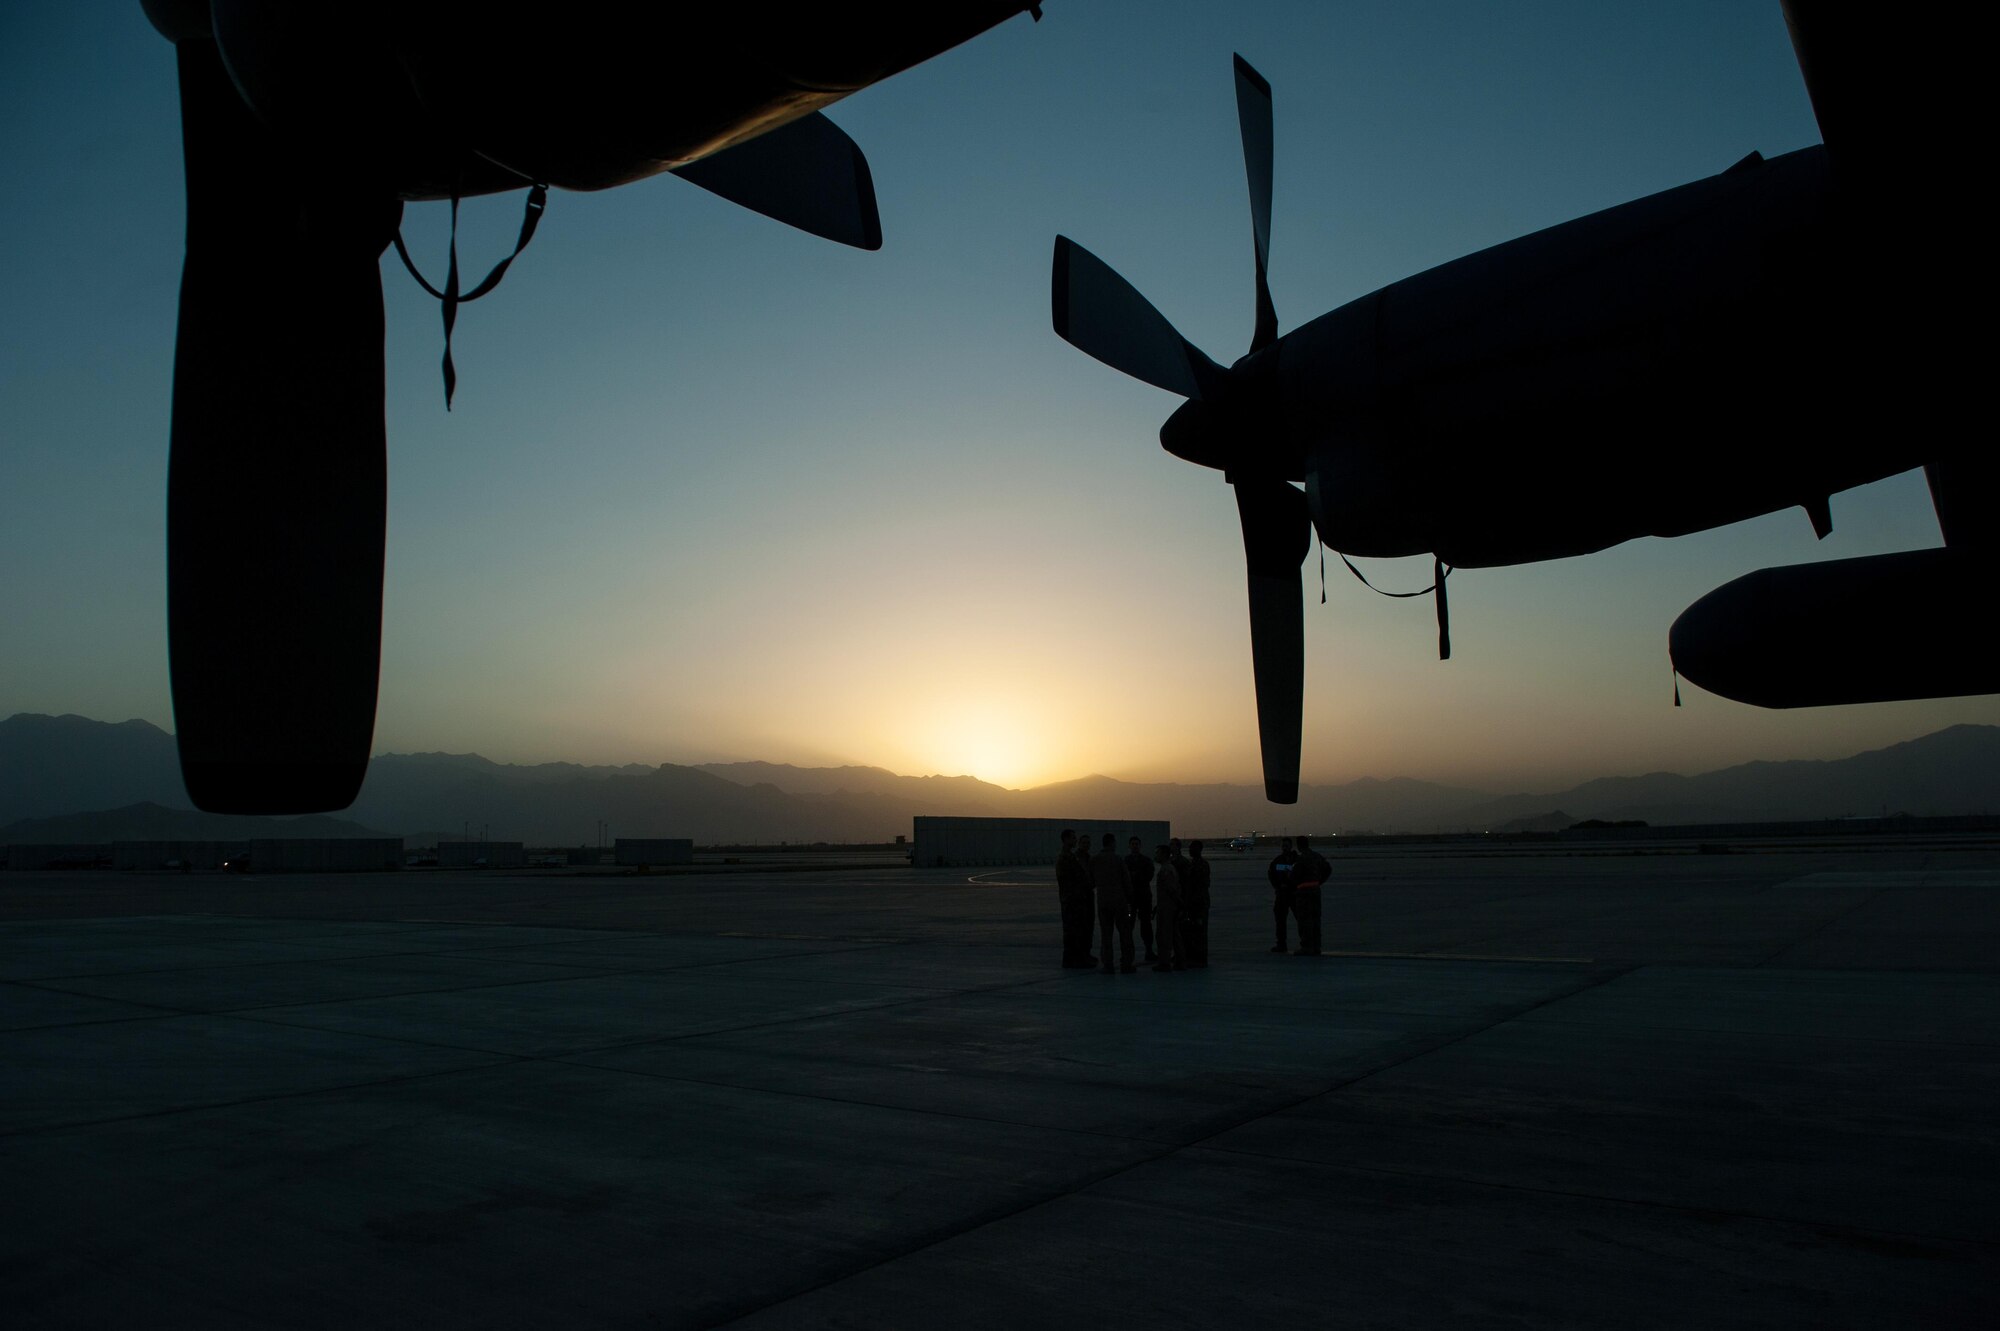 U.S. Airmen assigned to the 41st Expeditionary Electronic Combat Squadron talk during an EC-130H Compass Call aircraft final mission meeting on the flight line at Bagram Airfield, Afghanistan, Sept. 6, 2015.  The Compass Call is an airborne tactical weapon system using a heavily modified version of the C-130 Hercules airframe. (U.S. Air Force photo by Tech. Sgt. Joseph Swafford/Released)